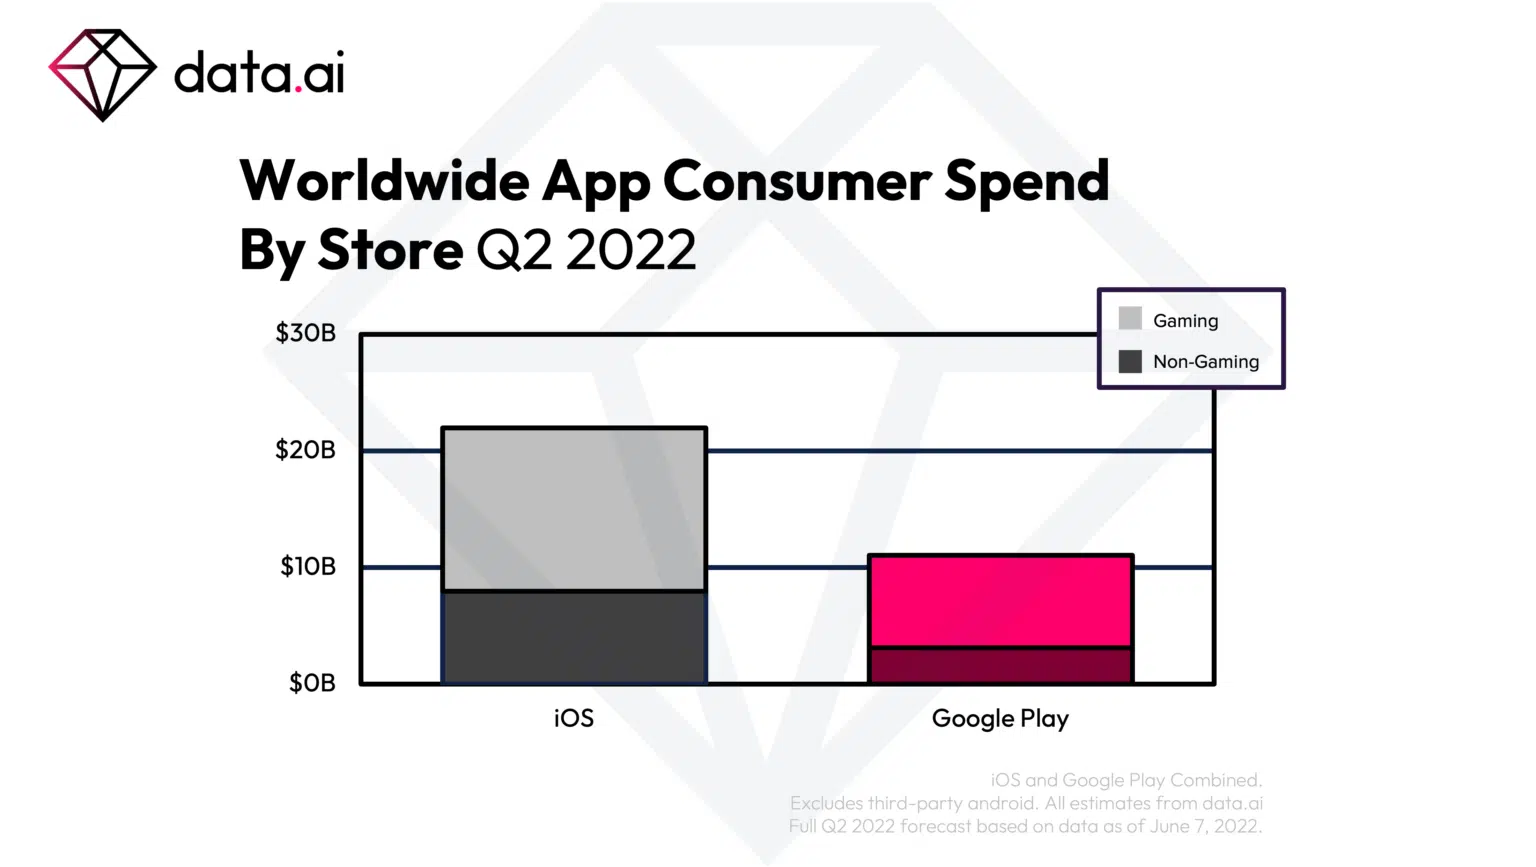 Mobile Games will Generate 30% More Revenue Than Before Covid